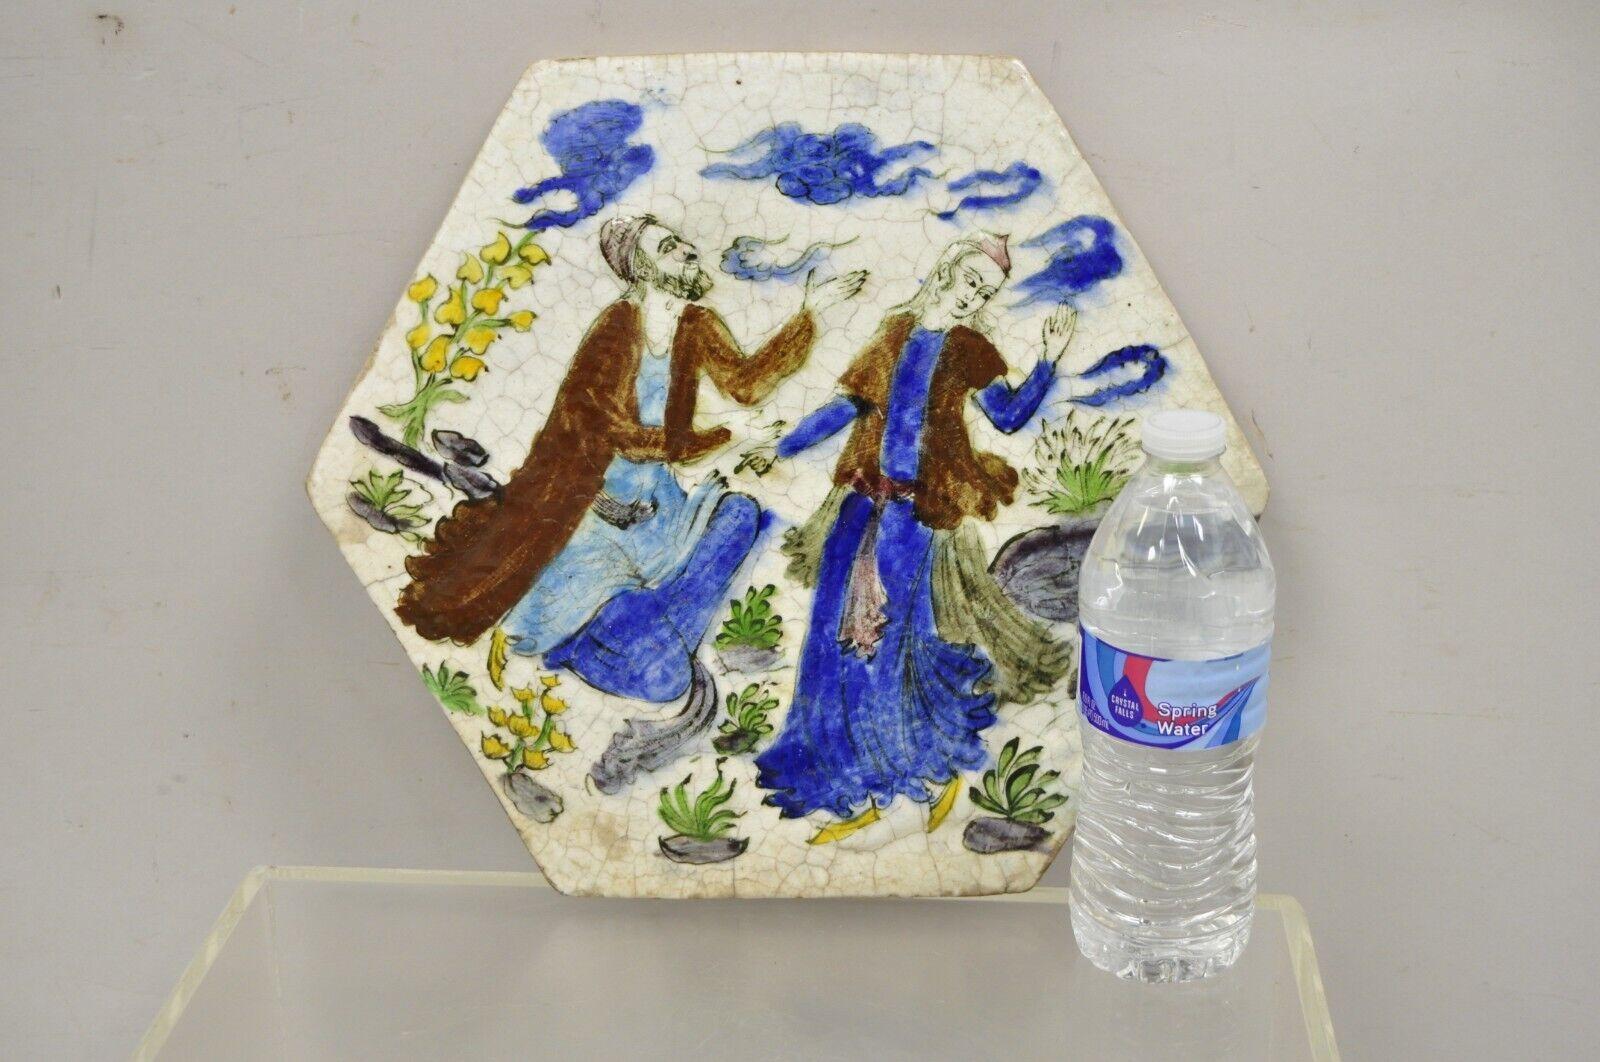 Antique Persian Iznik Qajar Style Ceramic Pottery Tile Hexagonal Blue Couple C5. Item features the original crackle glazed finish, heavy ceramic pottery construction, very impressive detail, wonderful style and form. Great to mount as wall art or